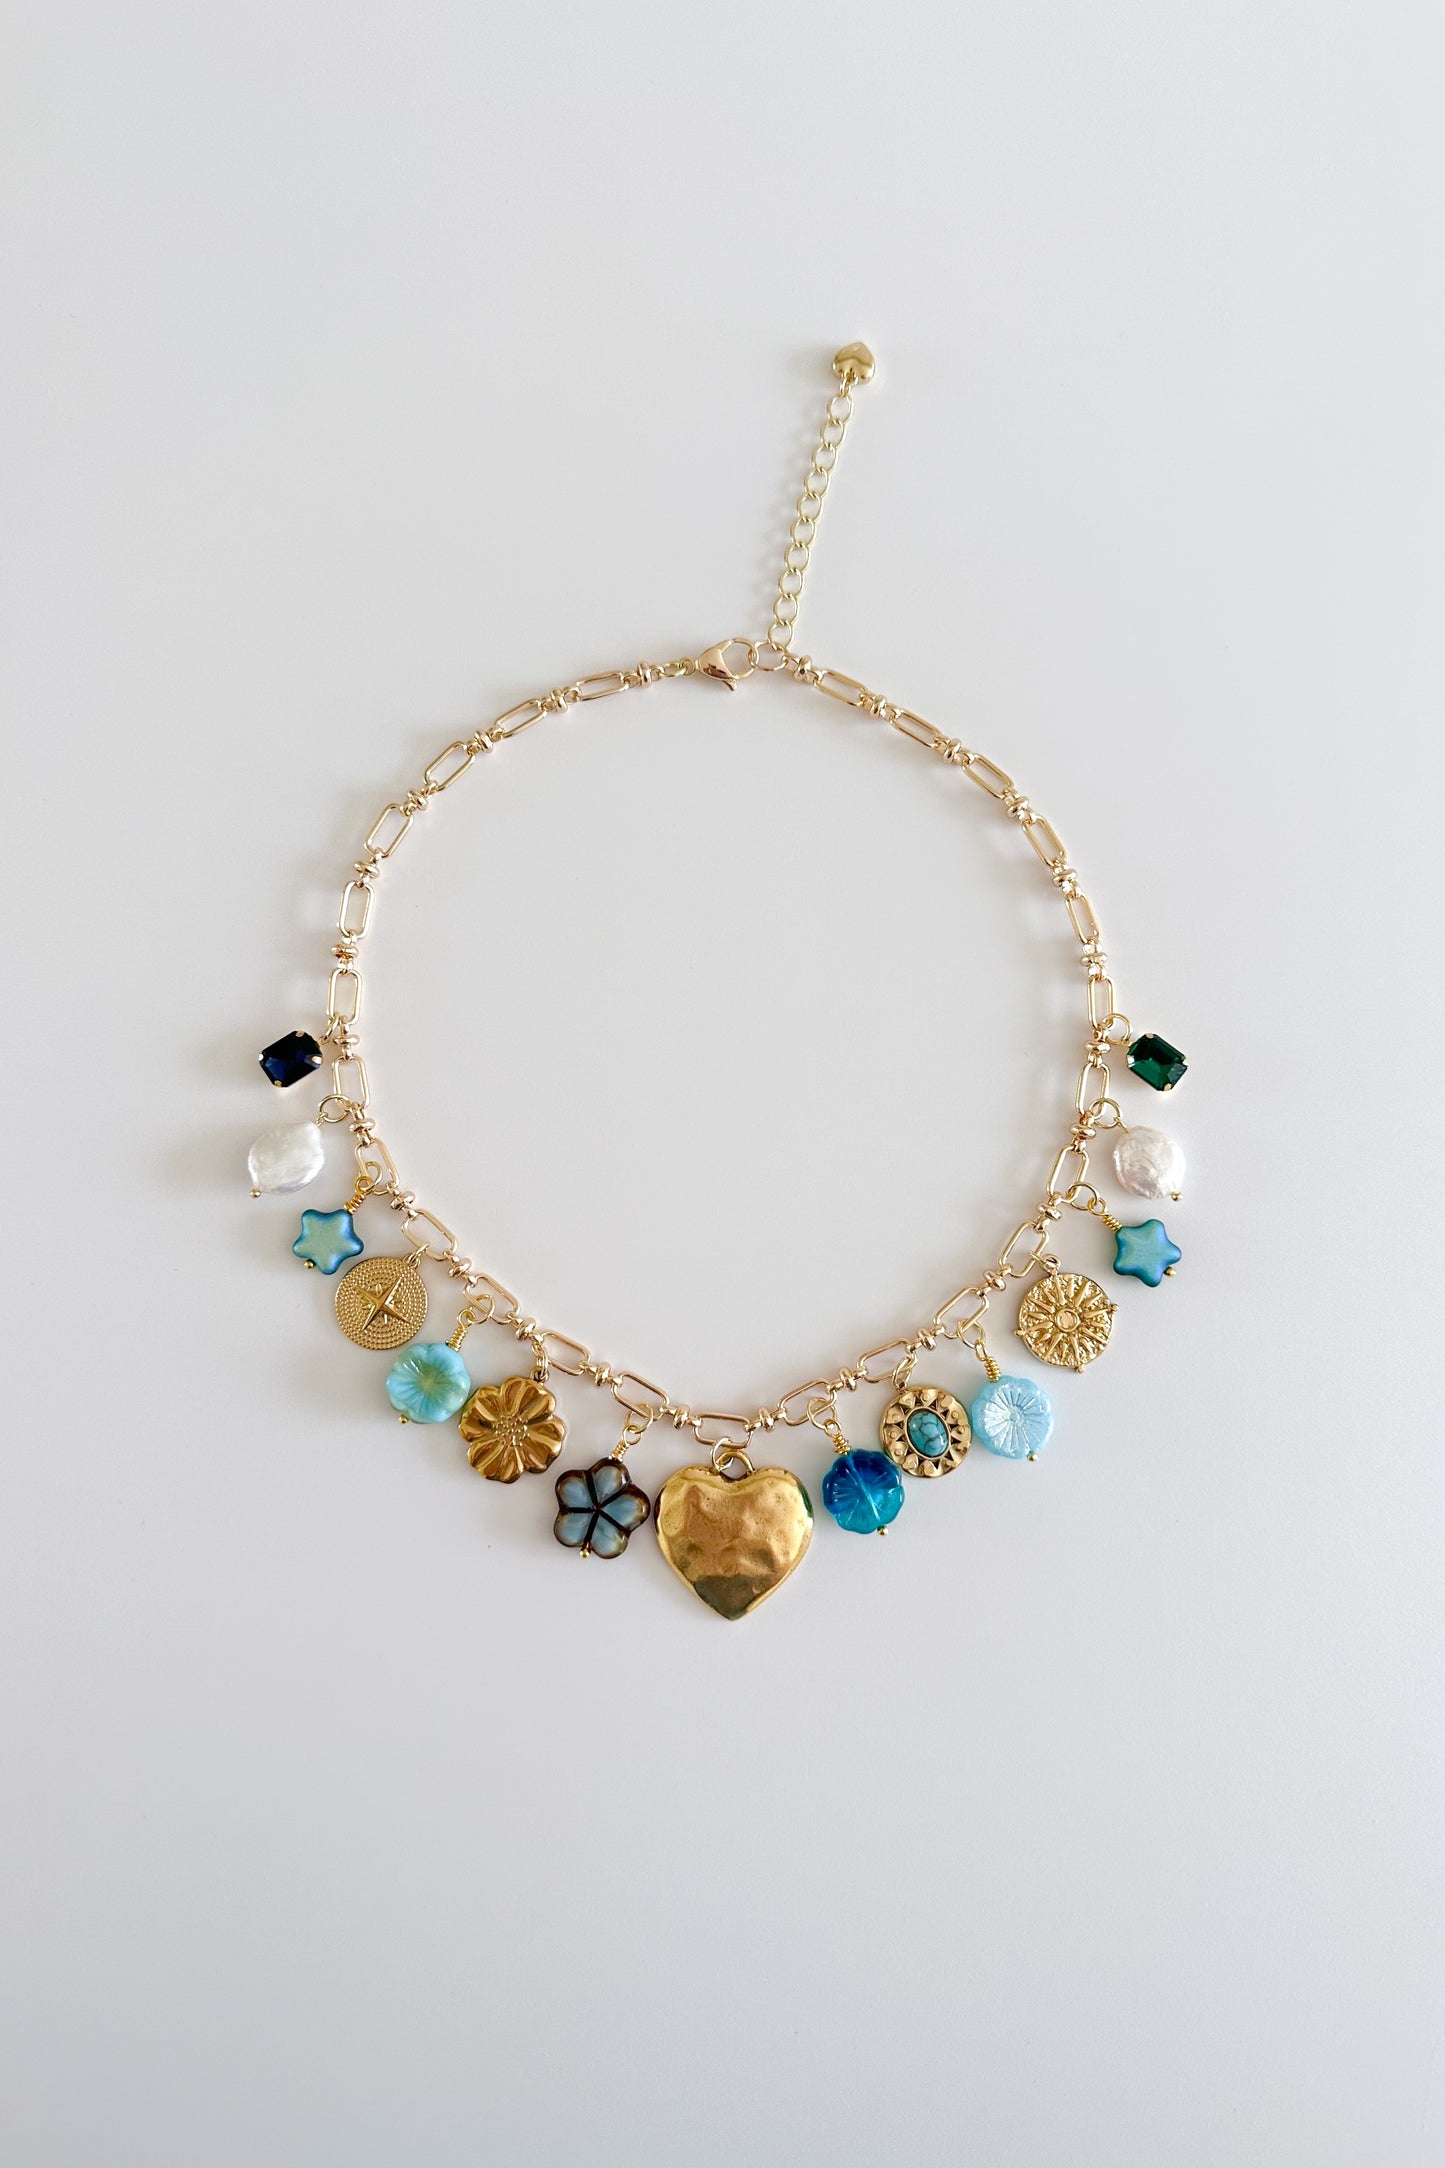 Bejeweled Gold Plated Statement Vintage Charm Necklace